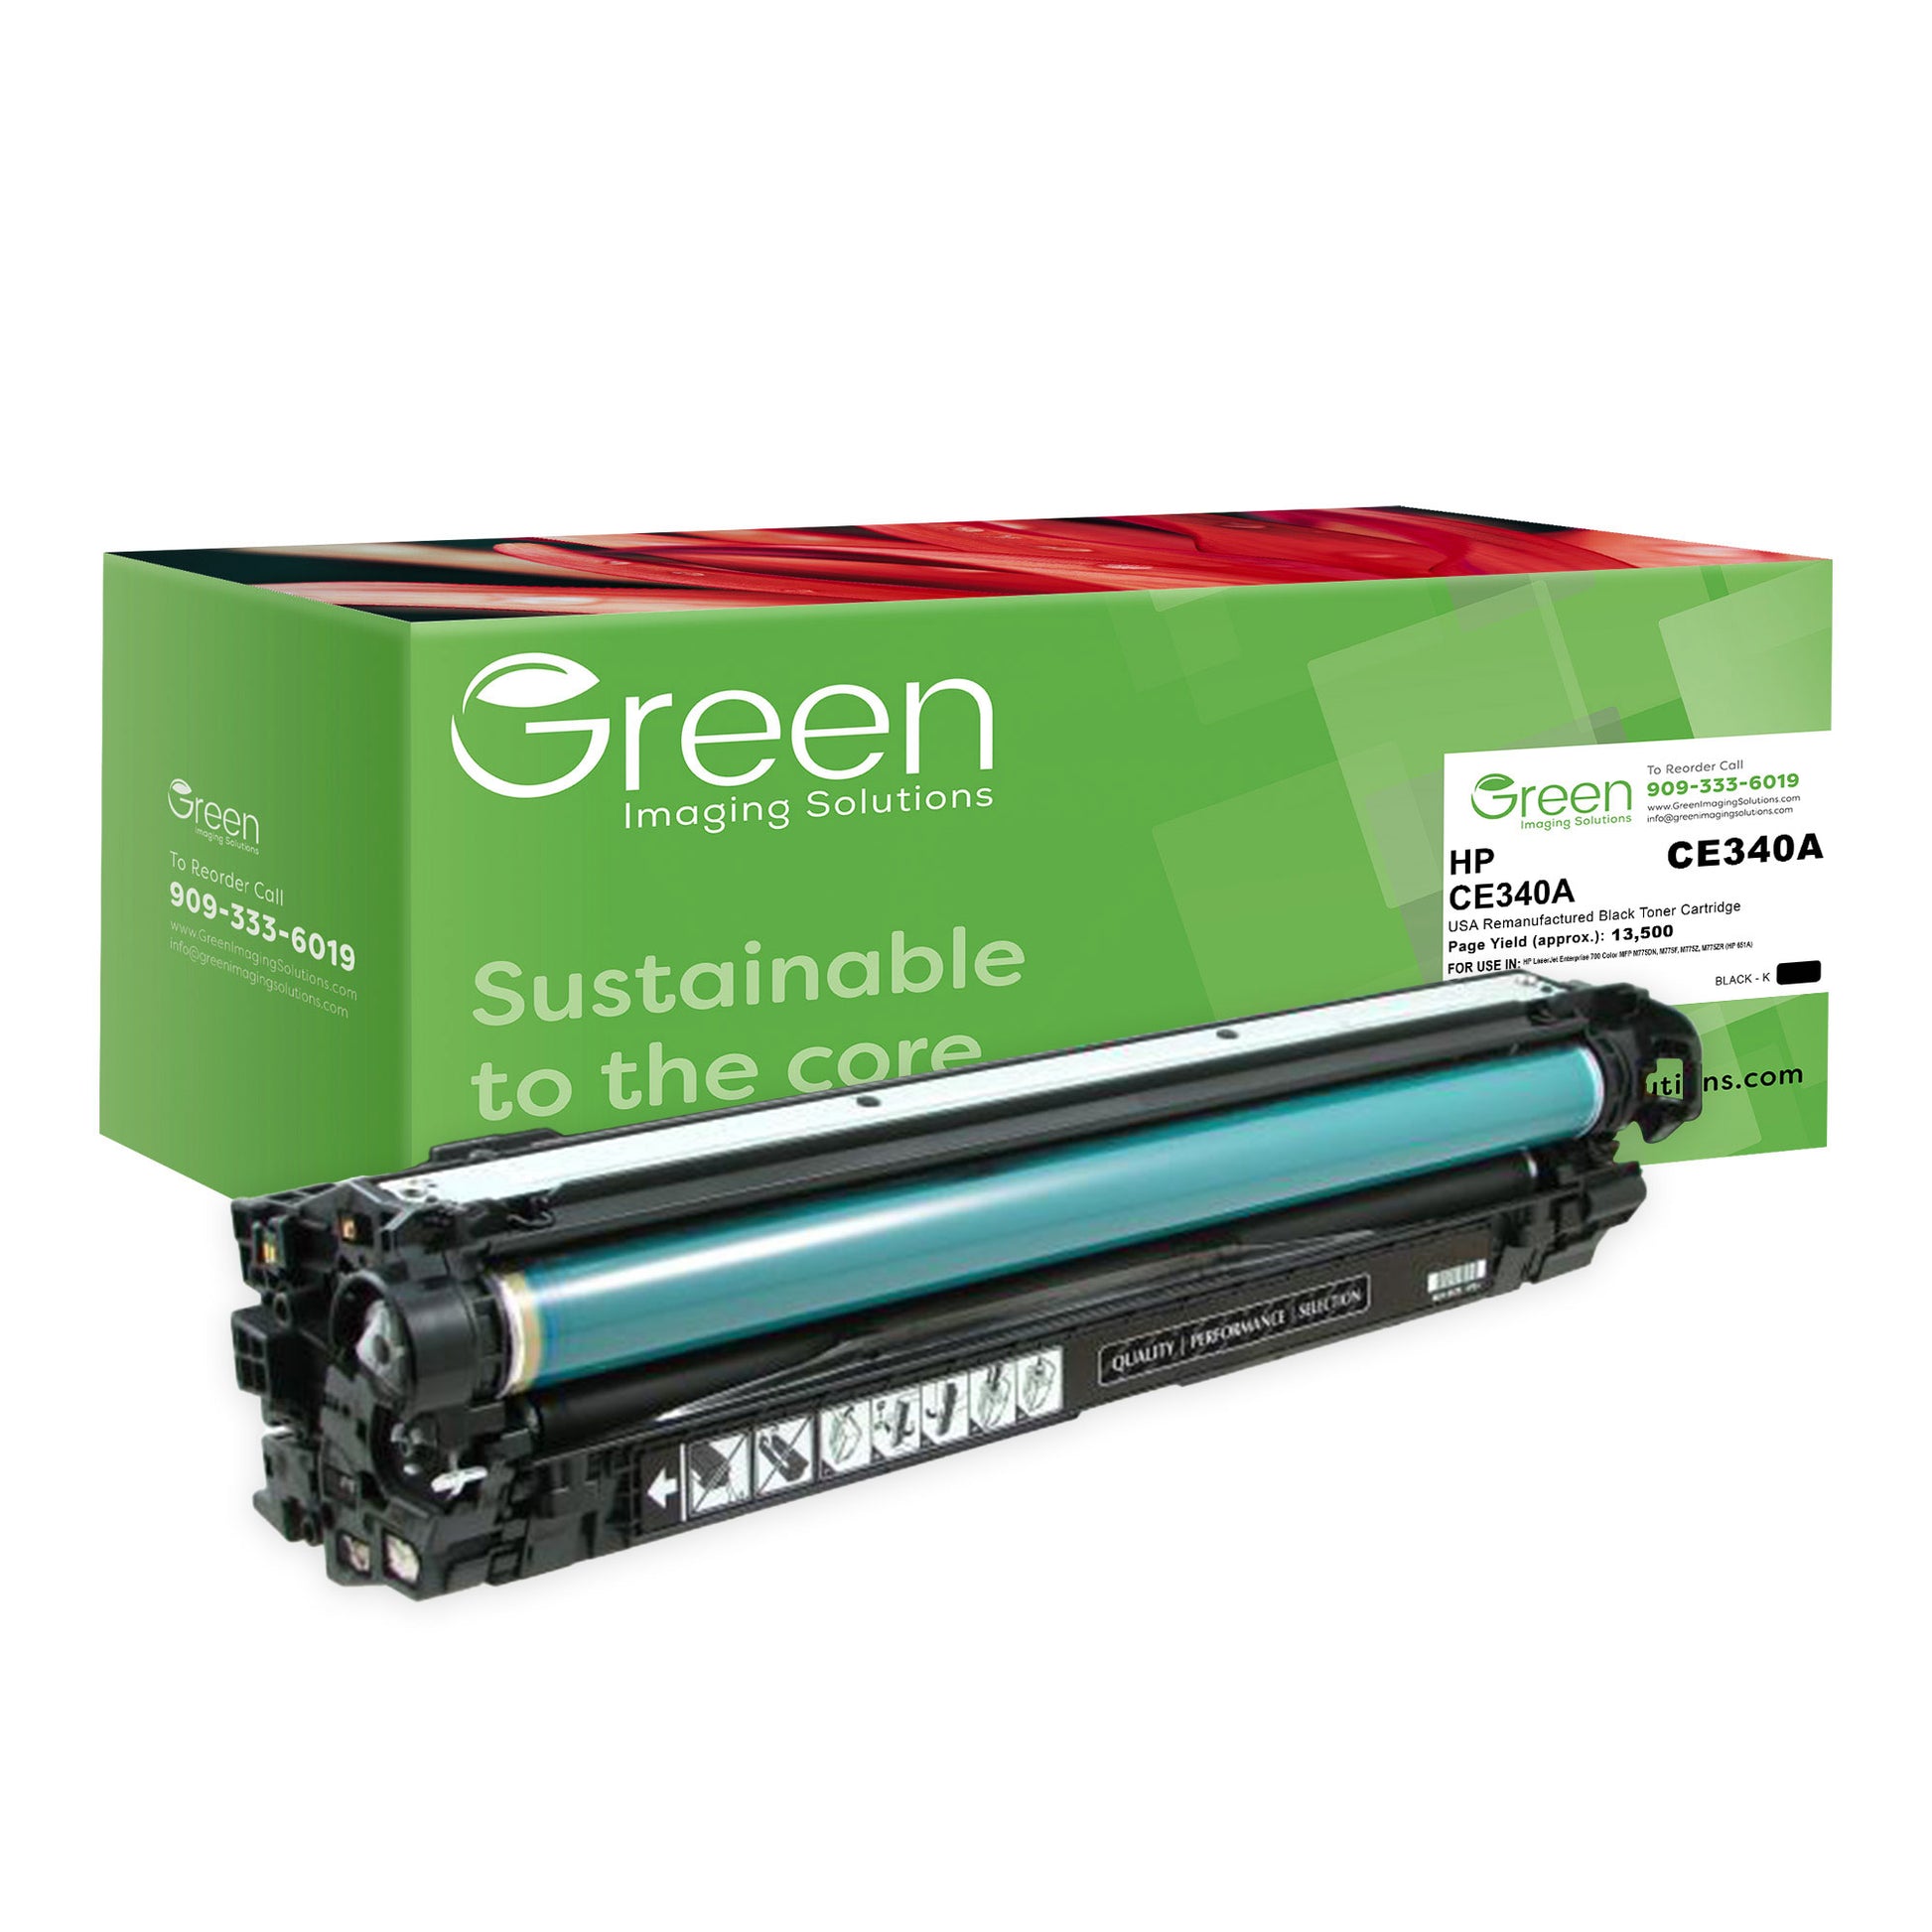 Viewer audition nikkel Black Toner Cartridge for HP CE340A (HP 651A) – Green Imaging Solutions